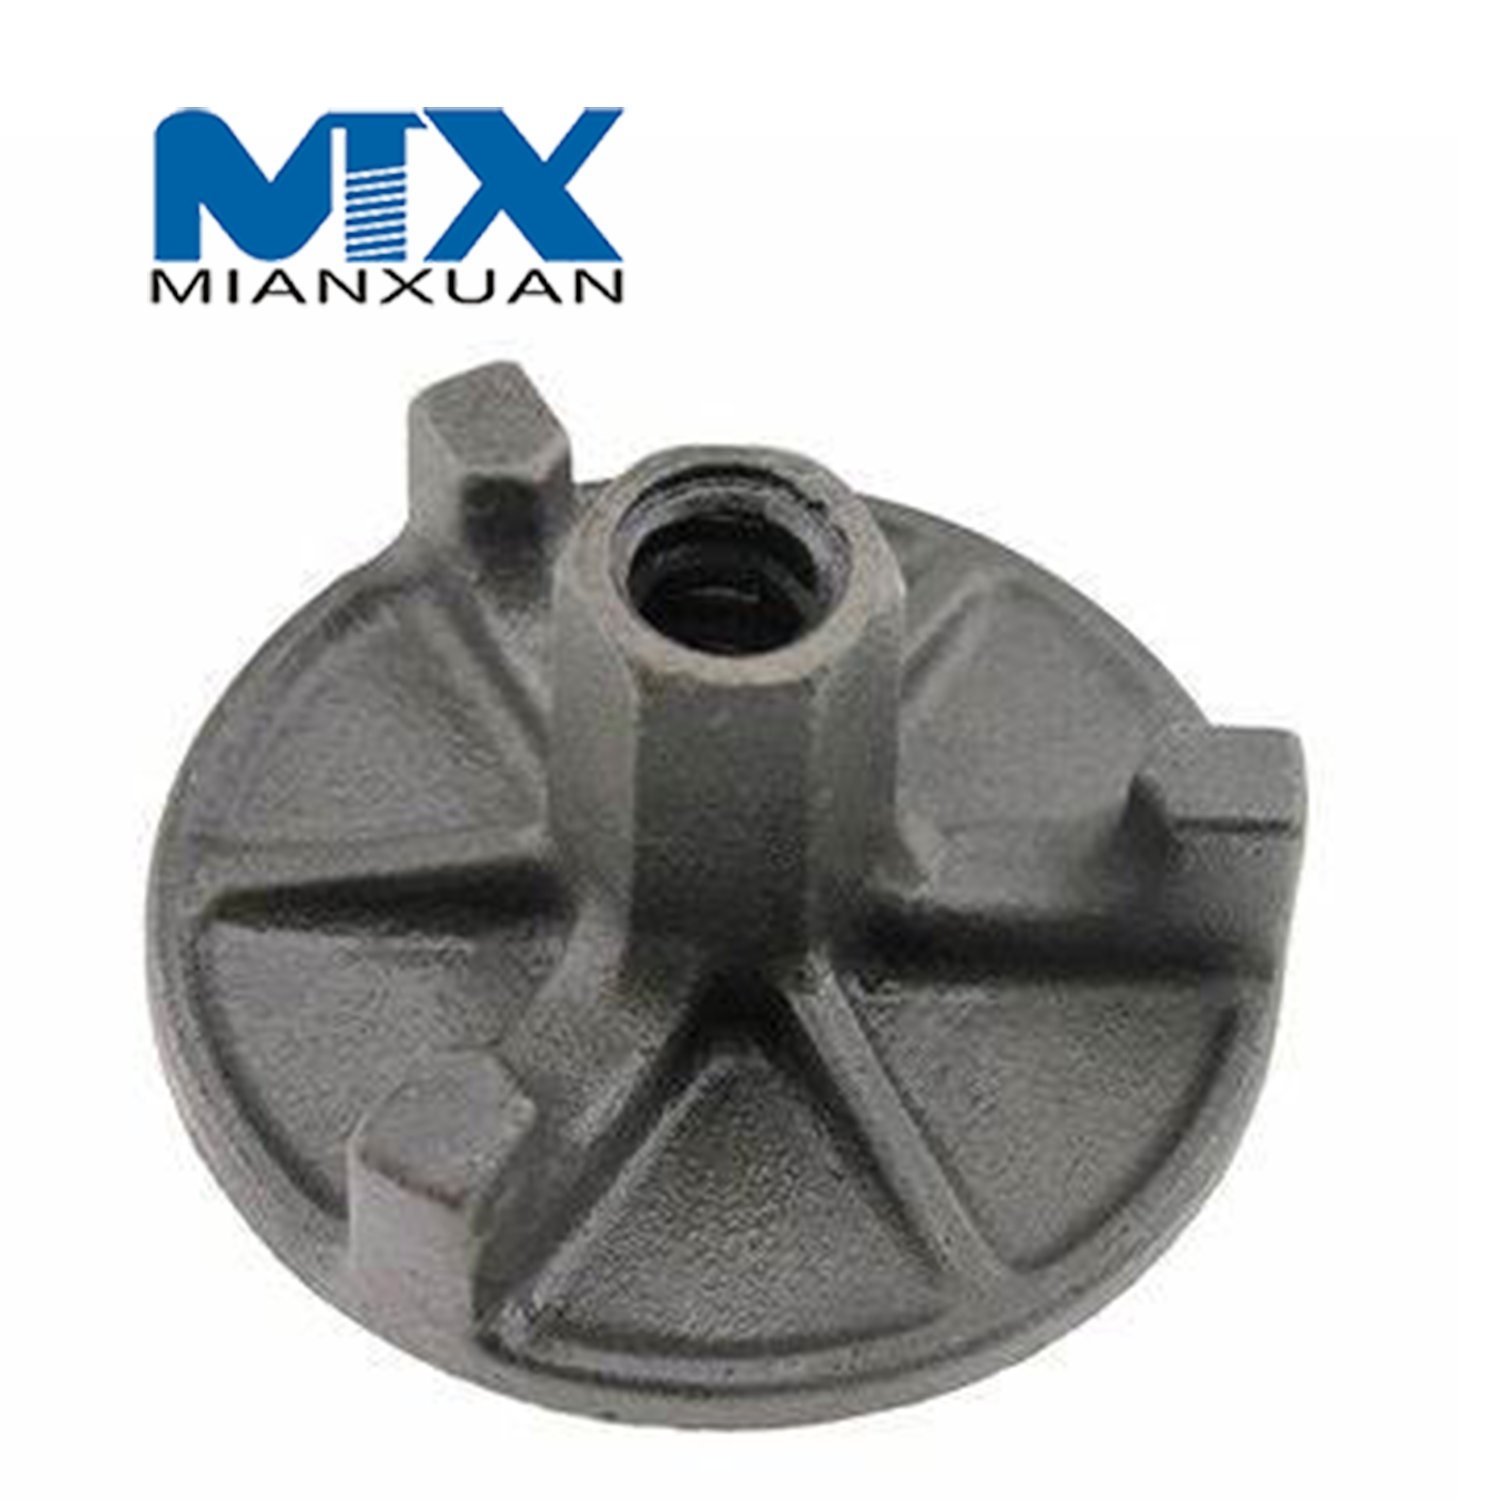 Concrete Formwork Nut Scaffolding Construction Drop Forged Galvanized Forged Wing Nut Swivel Nut Anchor Nut Tie Rod Nut Square Round Nut